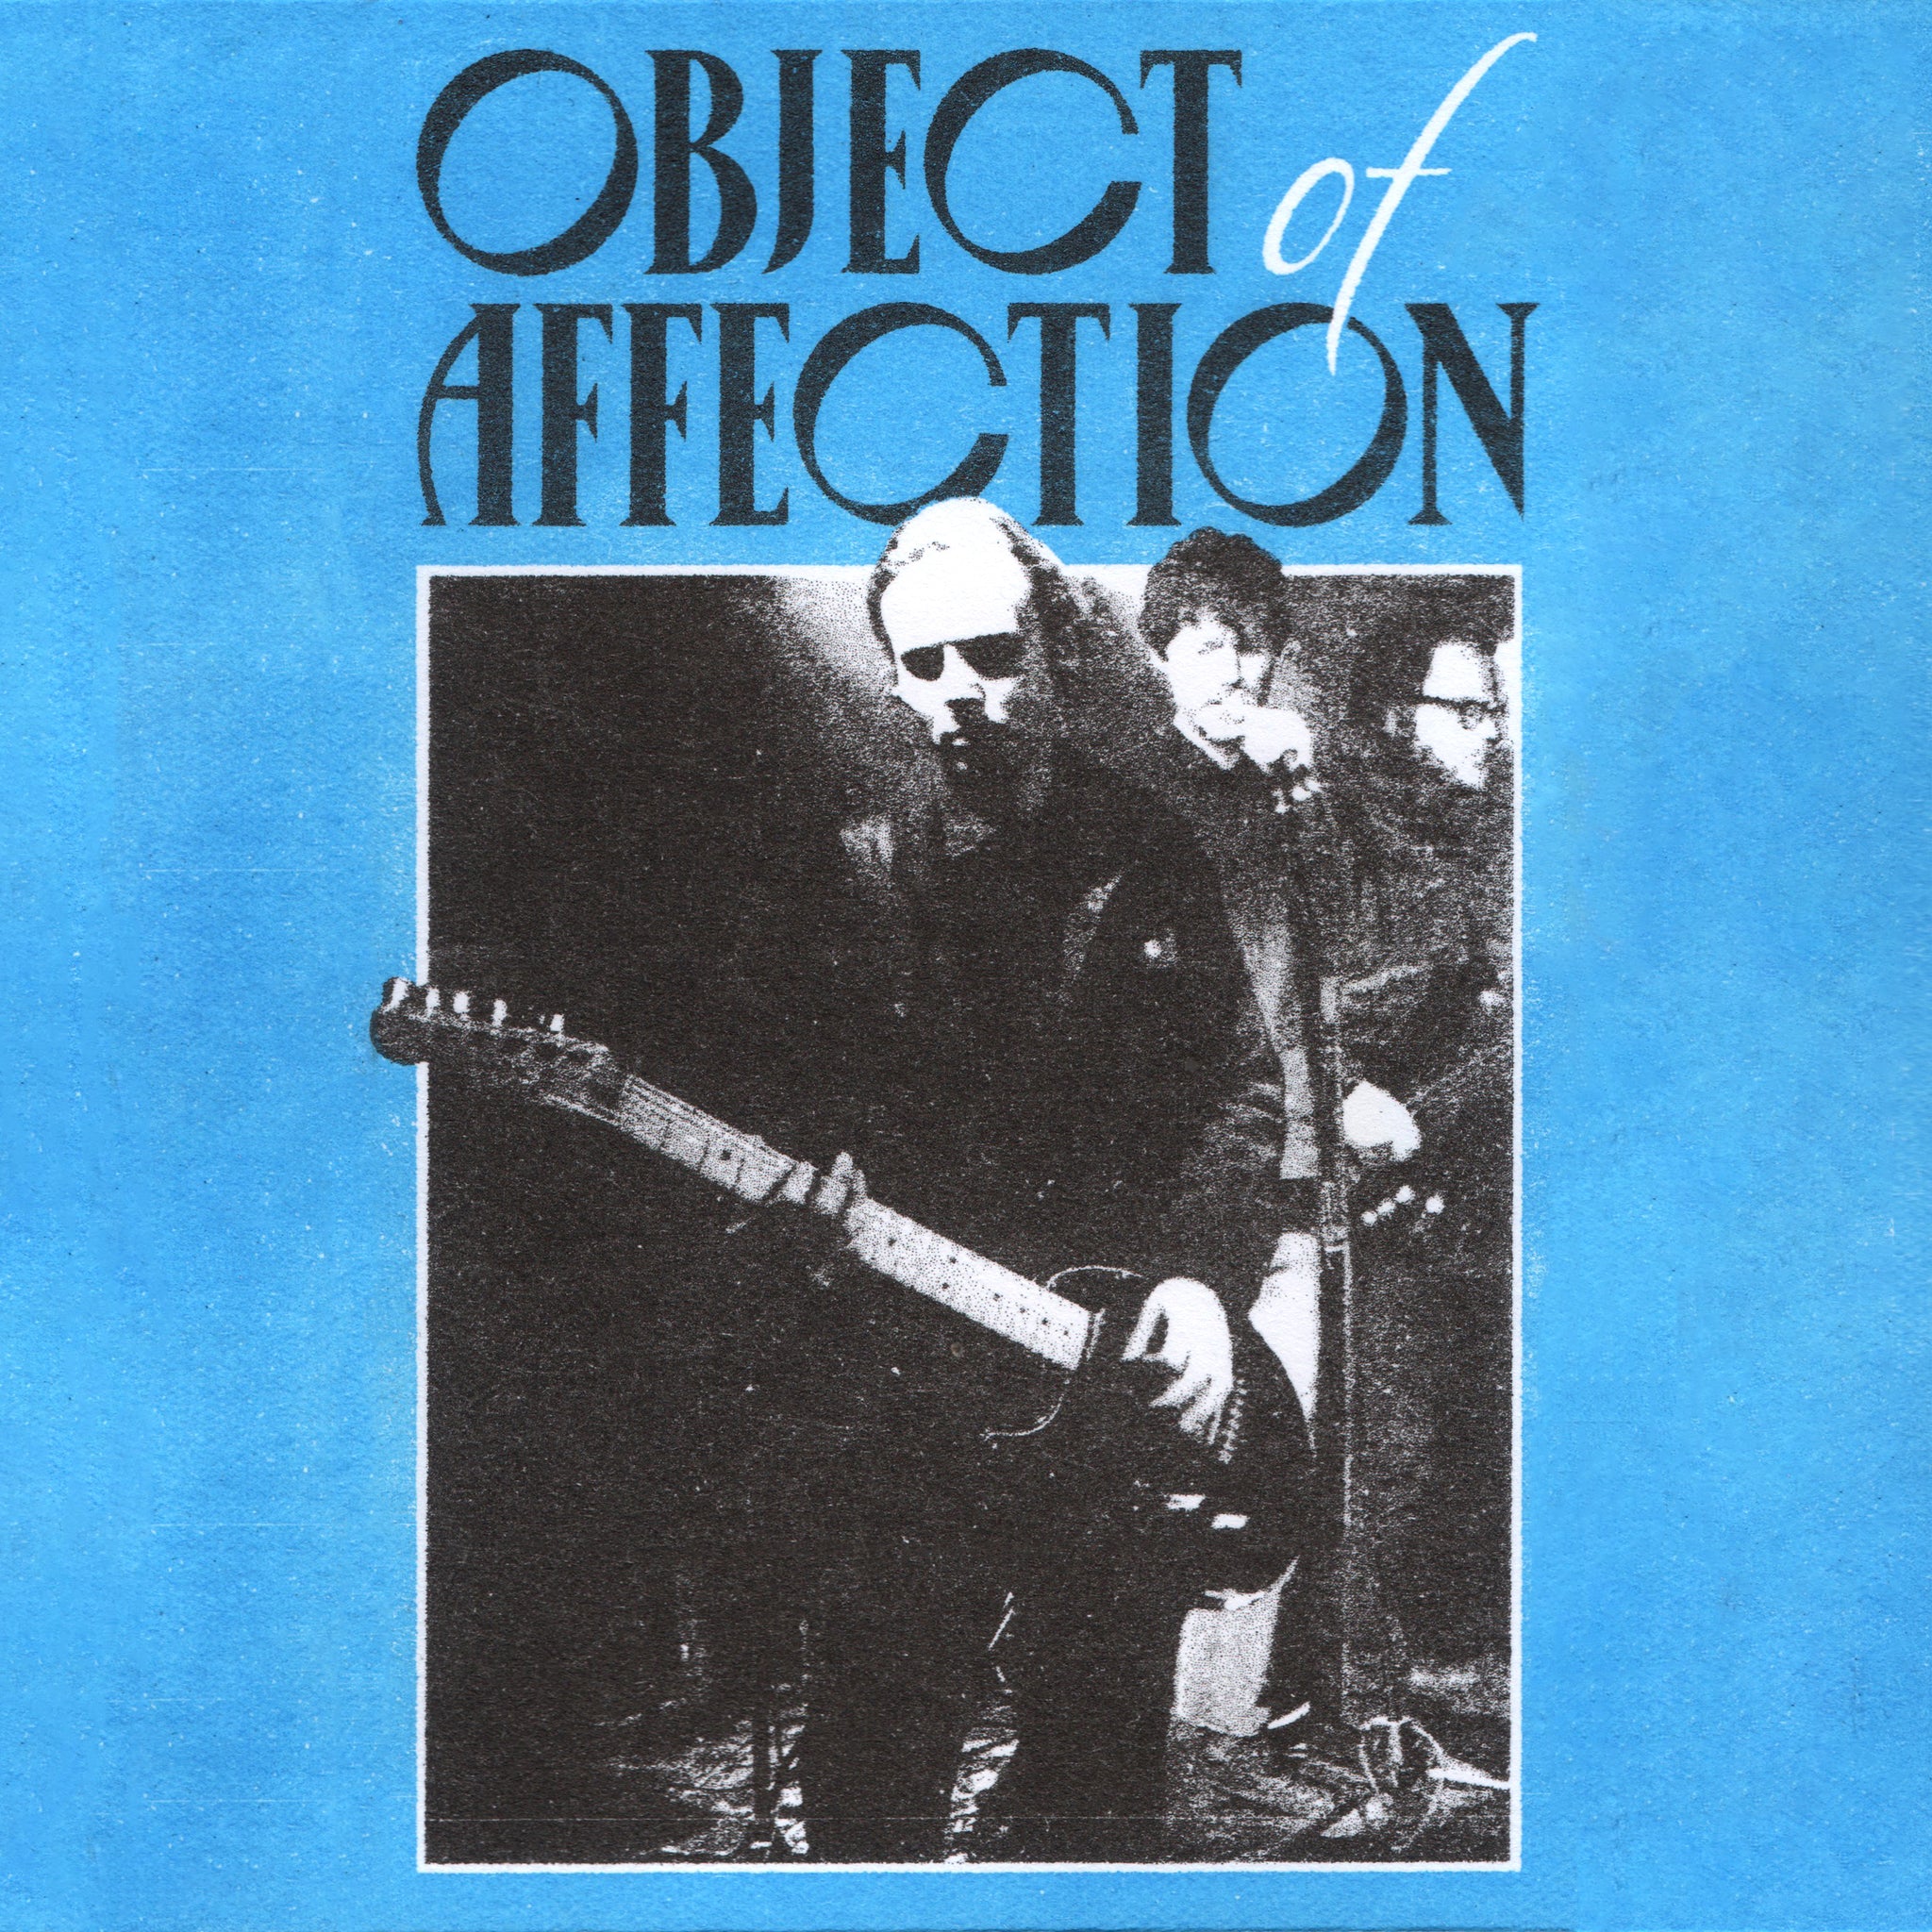 OBJECT OF AFFECTION - OBJECT OF AFFECTION Cassette Tape